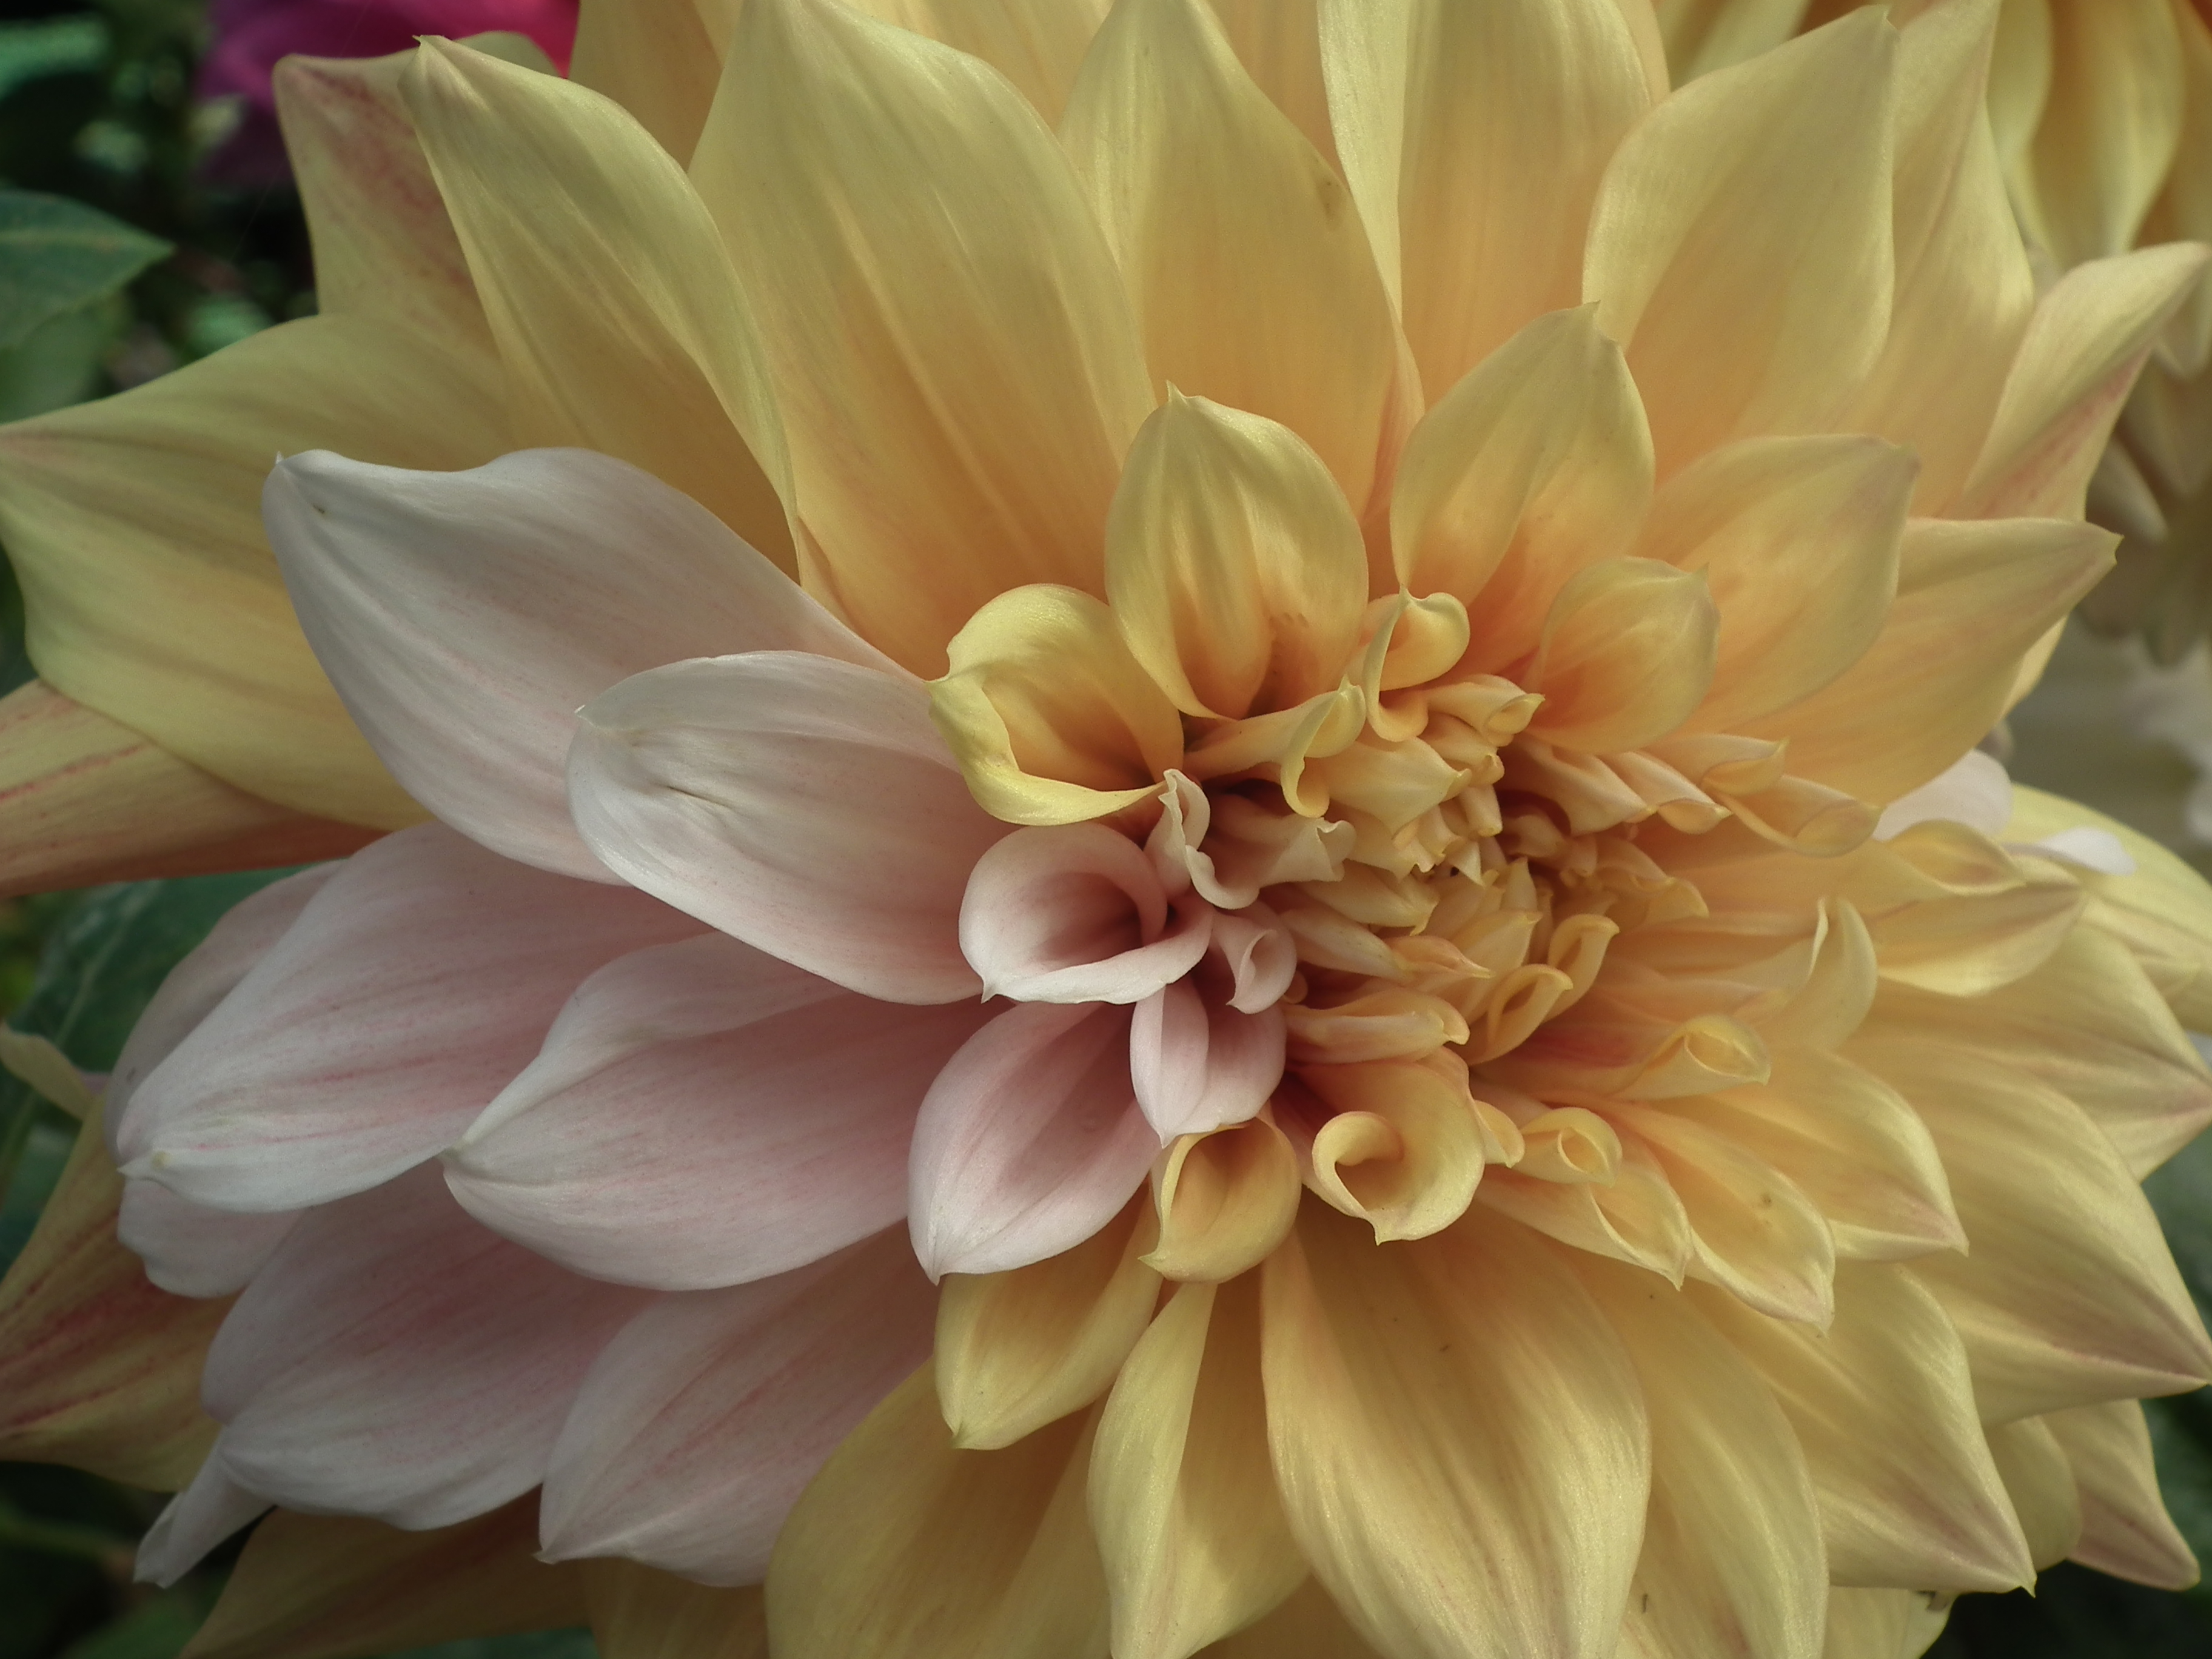 Dahlia from lalbagh 1932